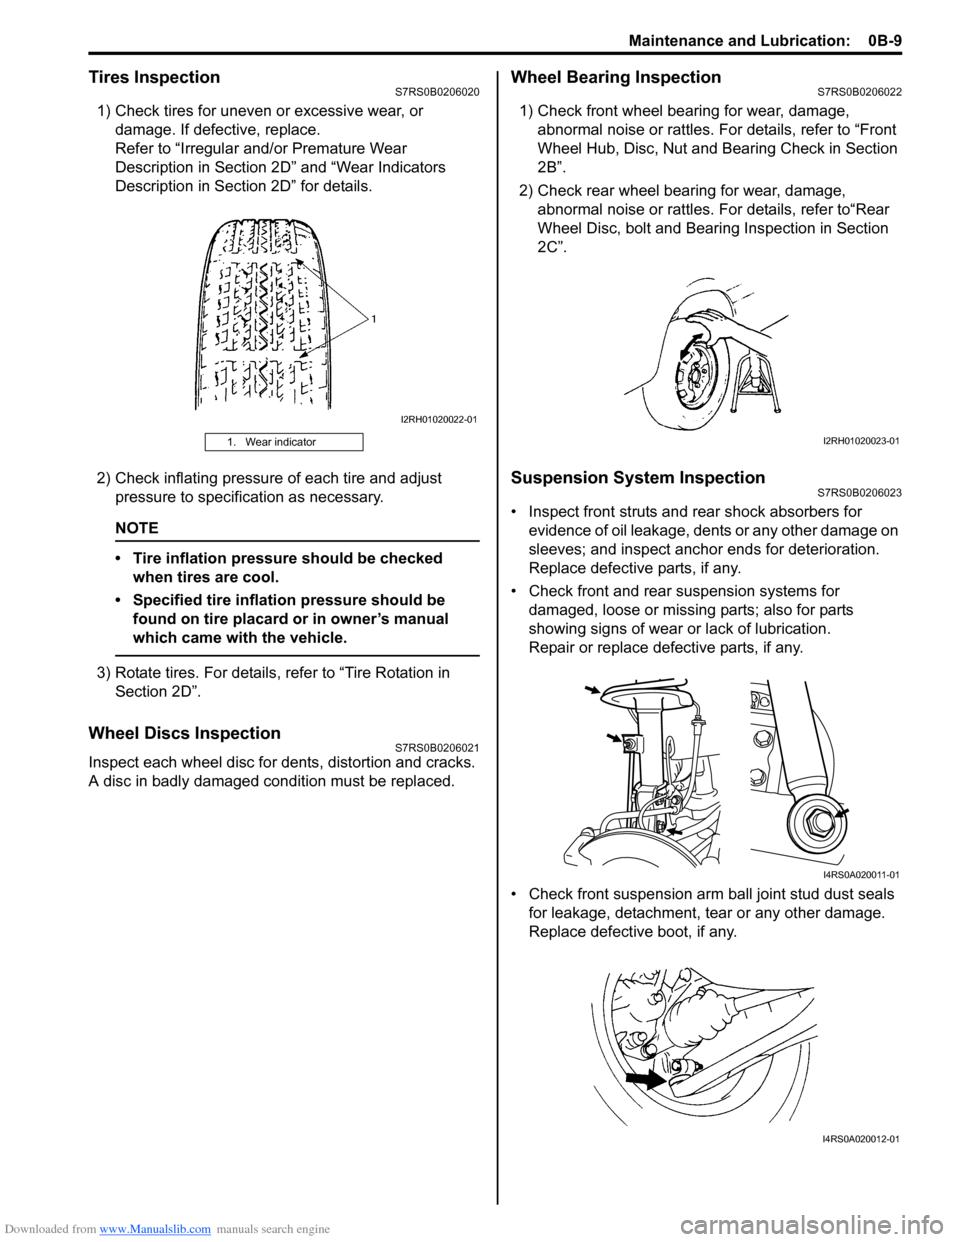 SUZUKI SWIFT 2004 2.G Service Workshop Manual Downloaded from www.Manualslib.com manuals search engine Maintenance and Lubrication:  0B-9
Tires InspectionS7RS0B0206020
1) Check tires for uneven or excessive wear, or damage. If defective, replace.